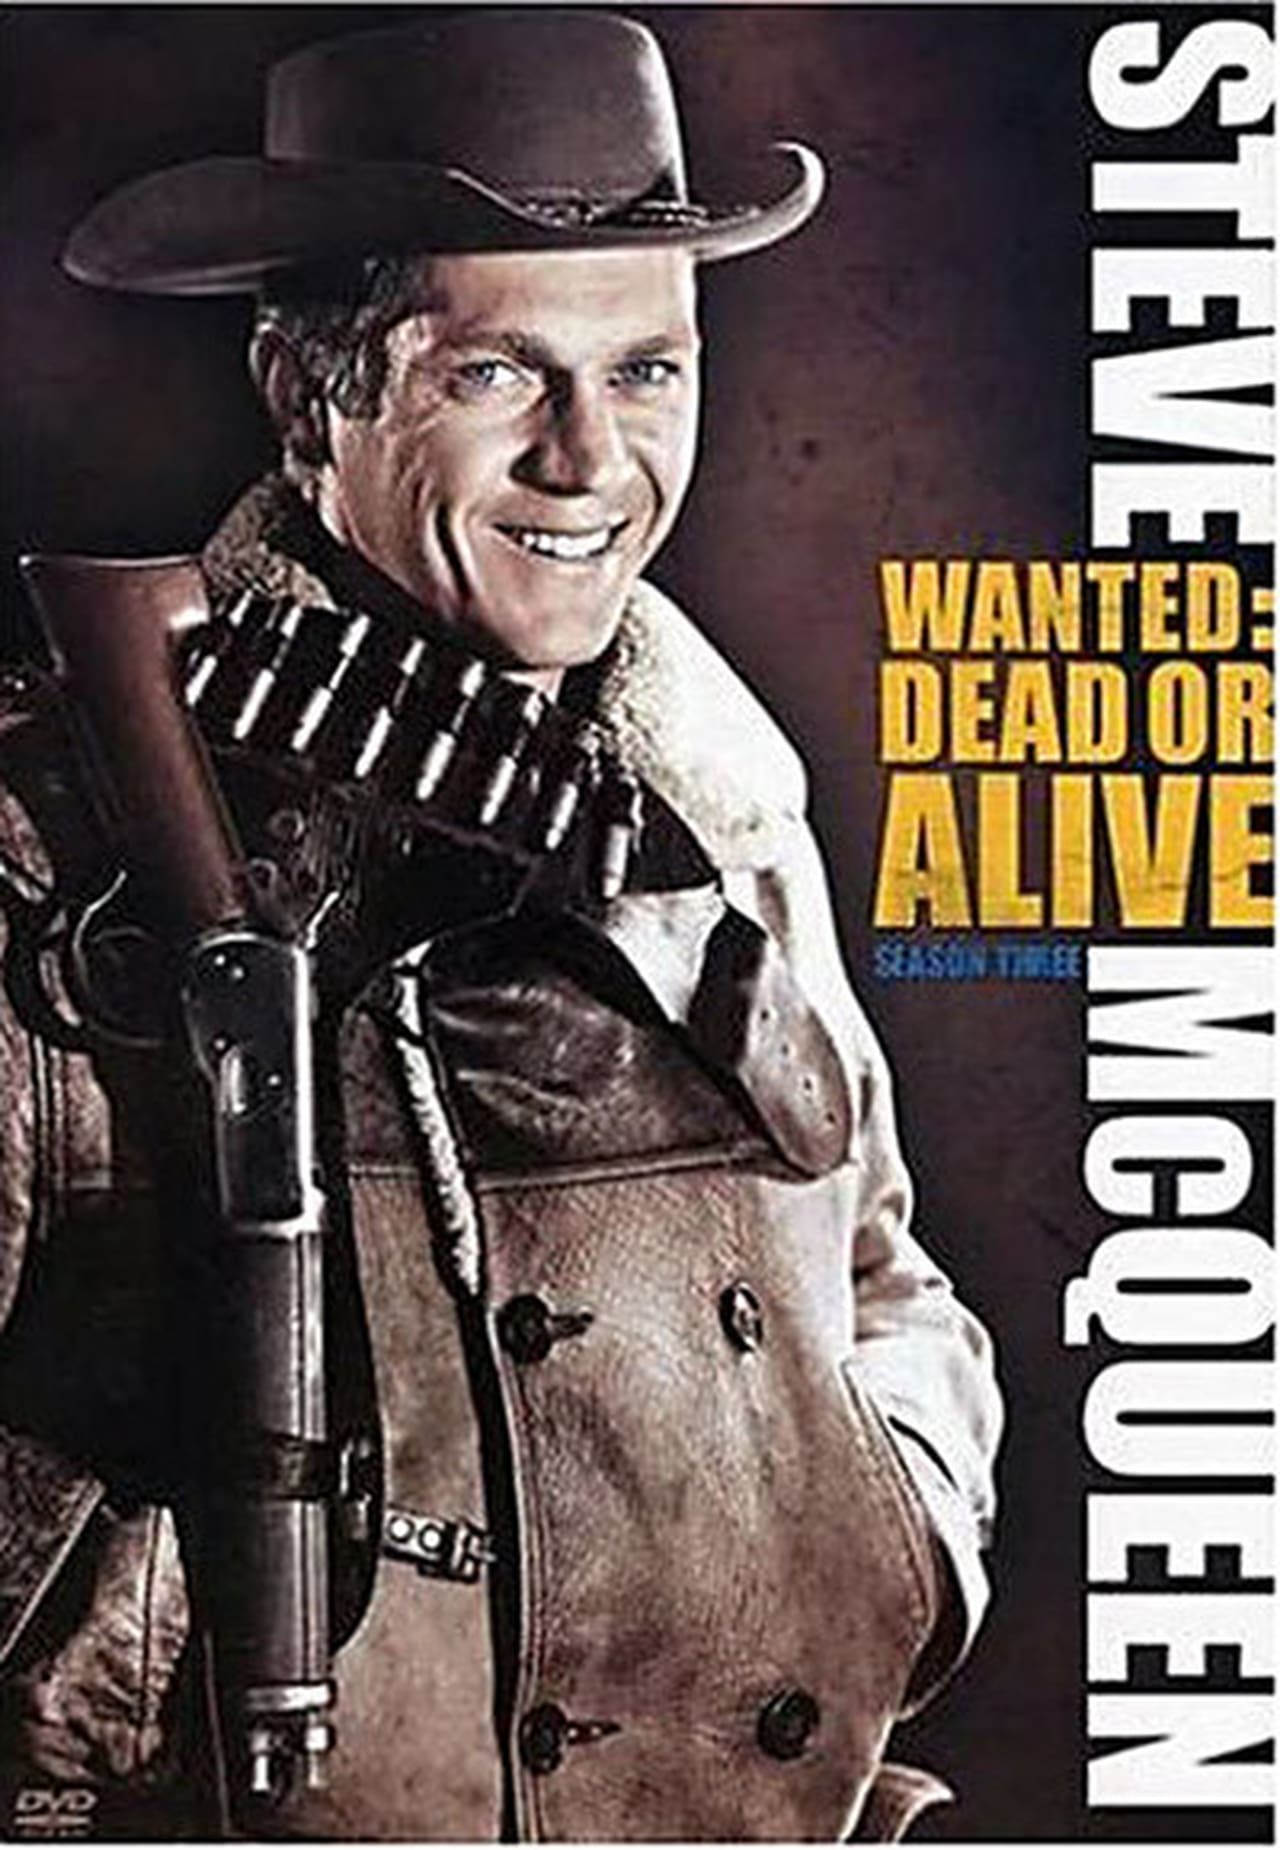 Wanted: Dead Or Alive (1960)